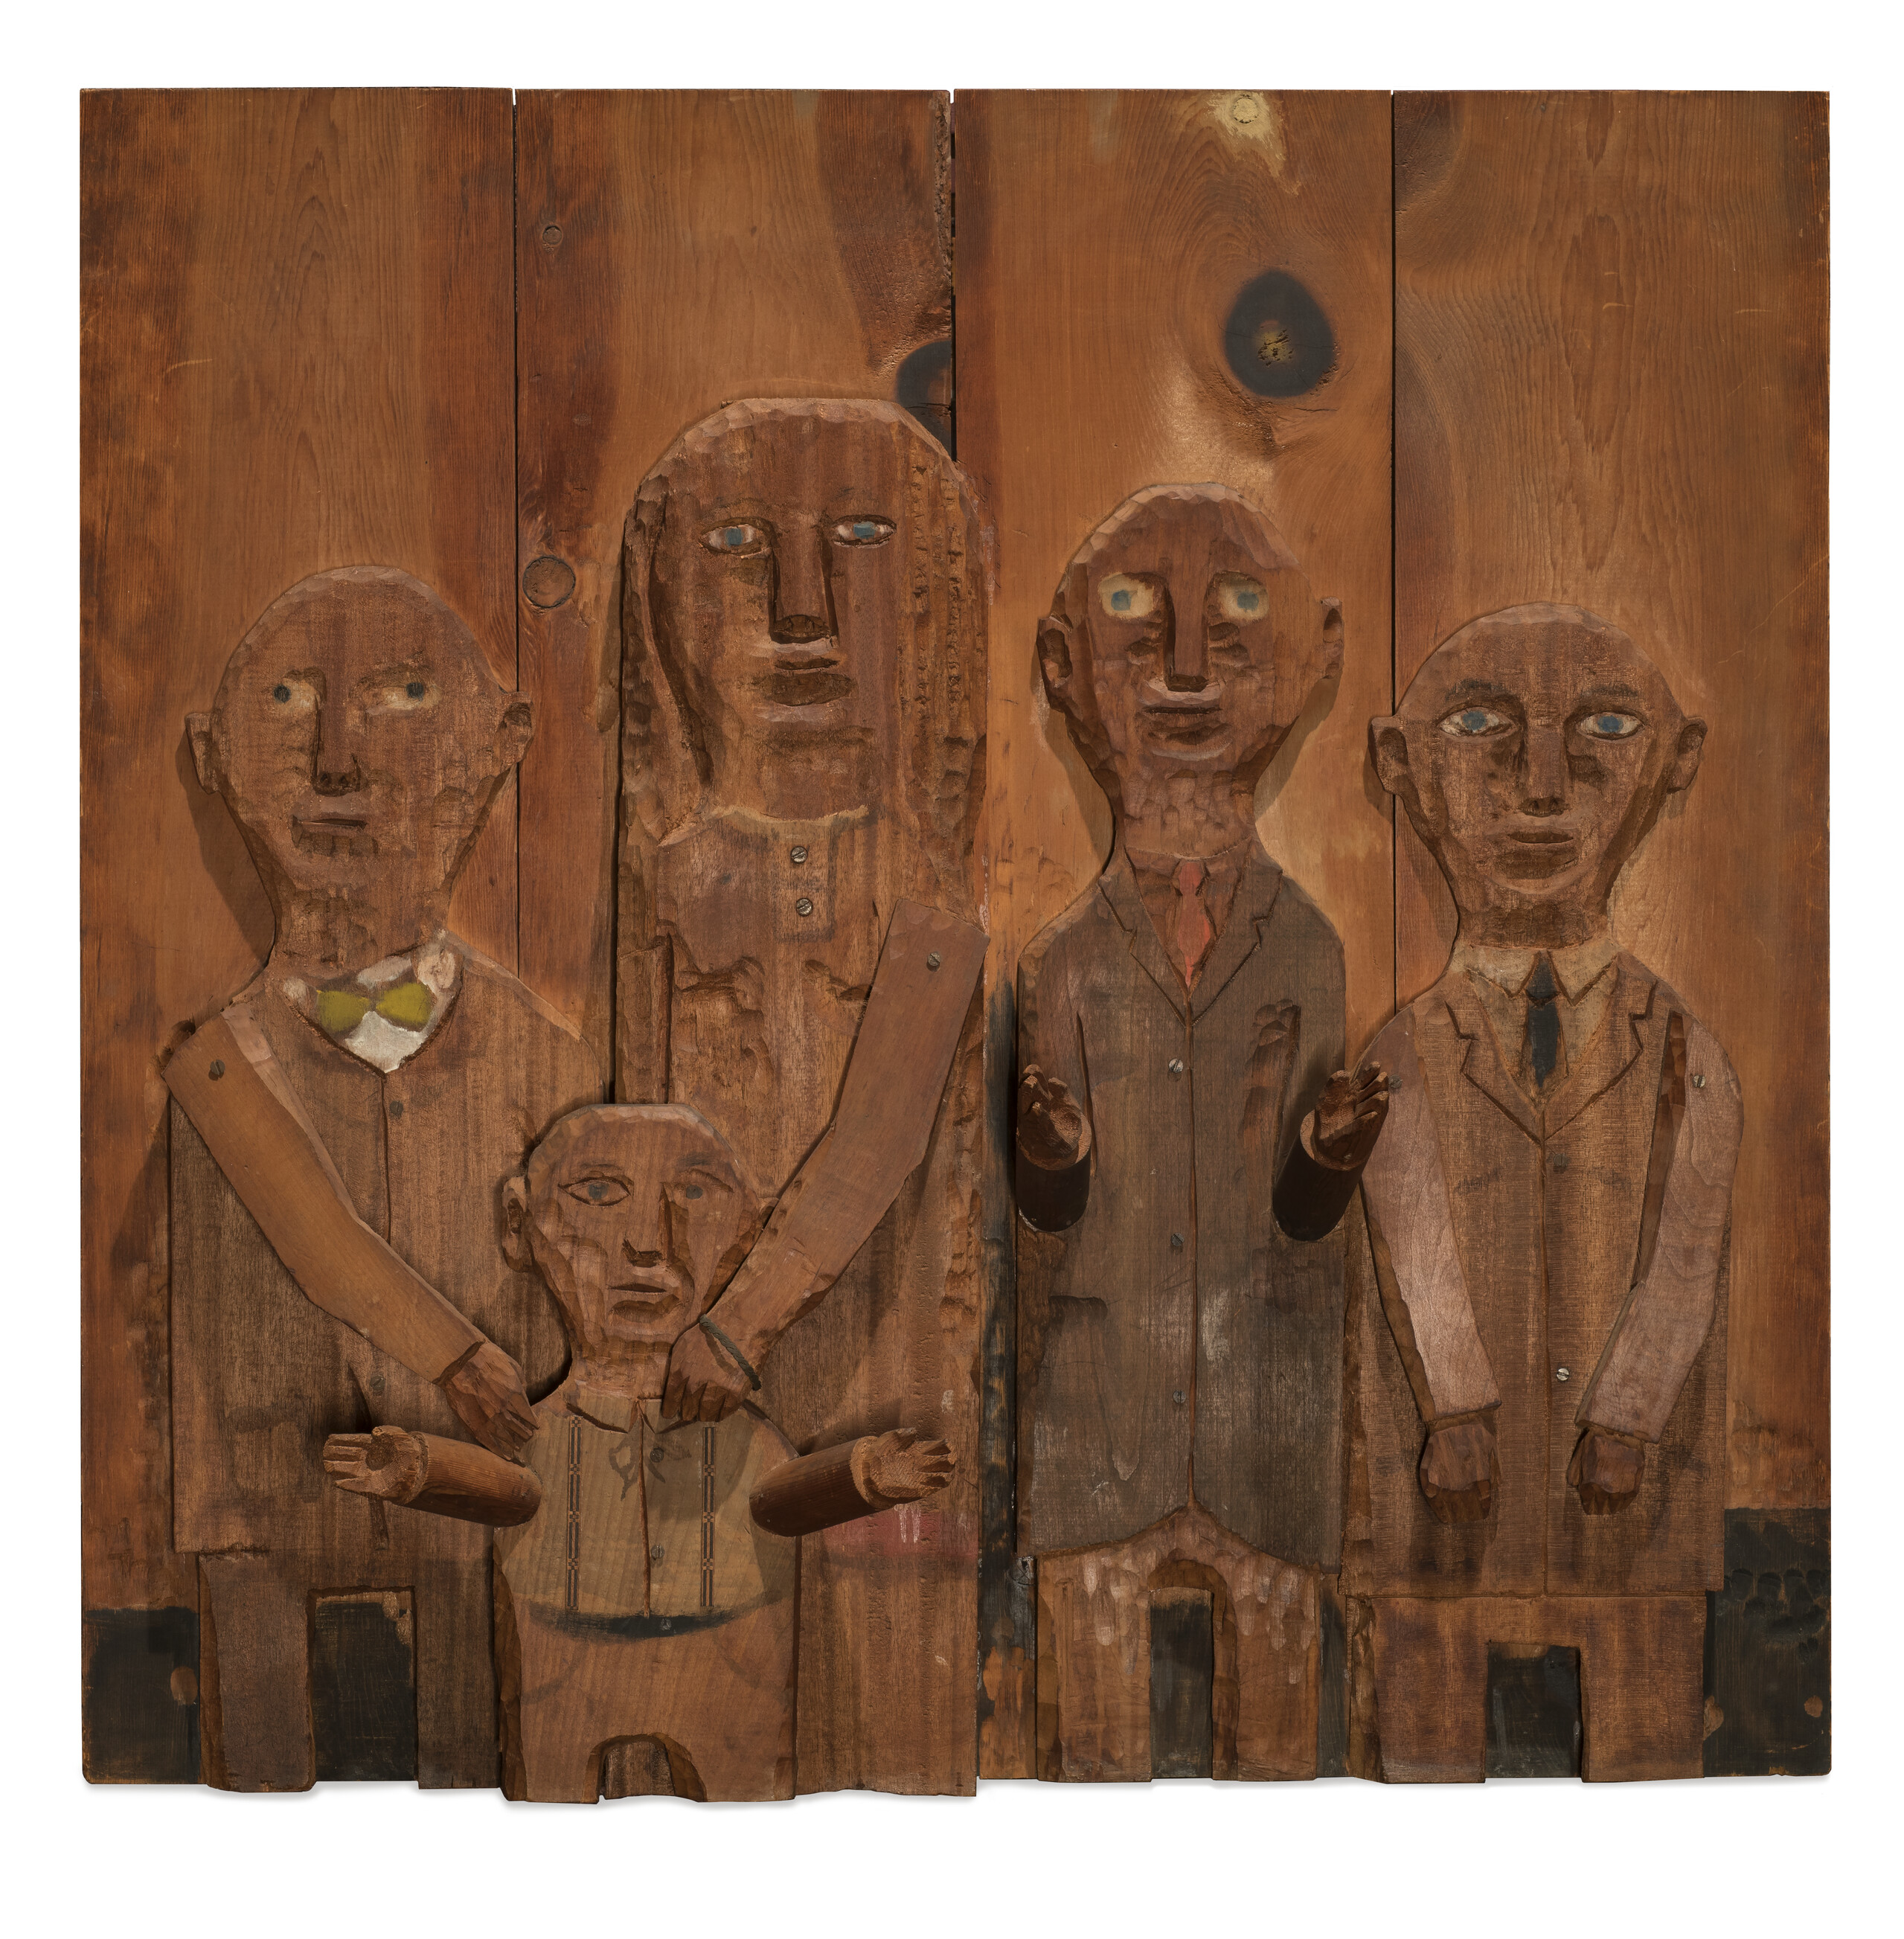 A wooden relief sculpture of four adults and one child. The two figures on the left put their hands on the shoulders of the child in front of them. The arms and hands of all figures are three dimensional and protrude from the work.